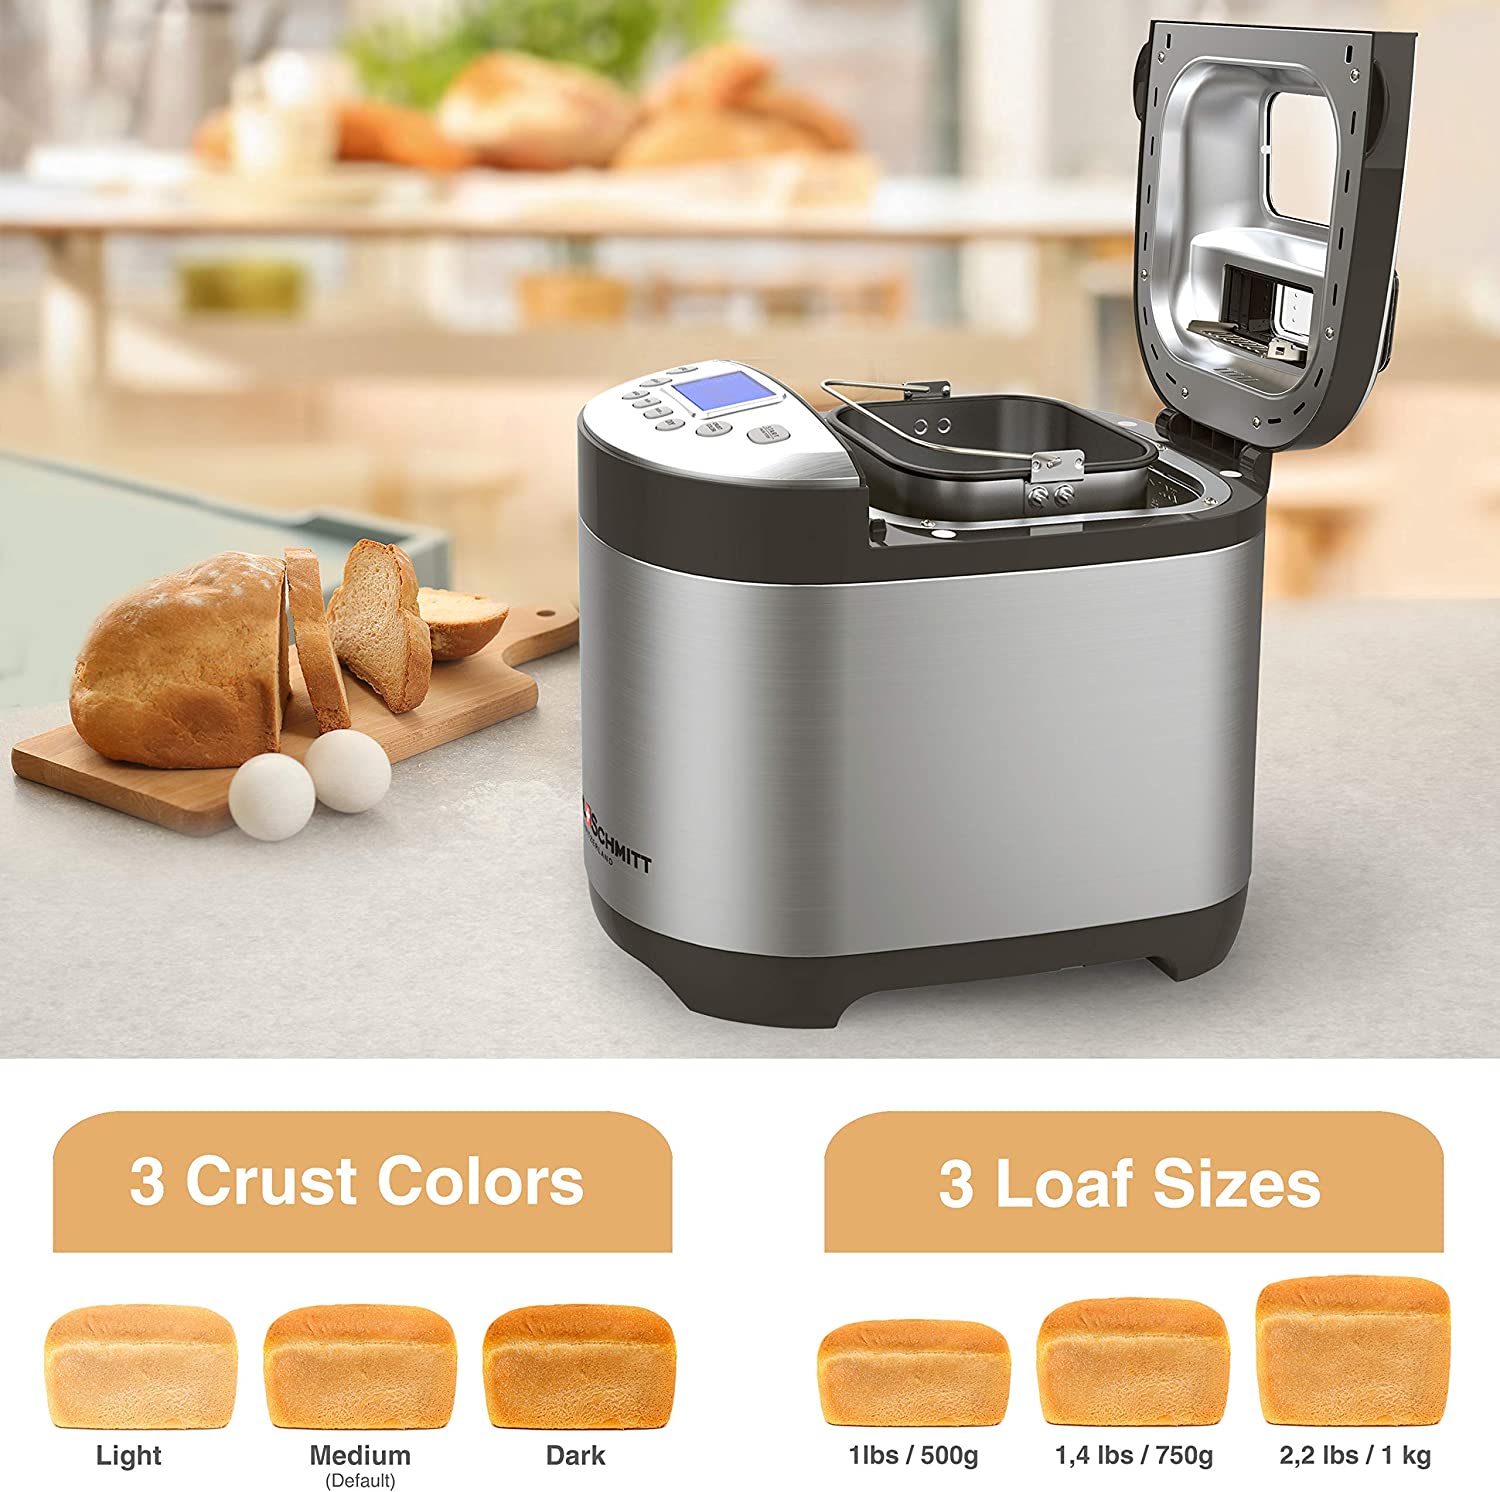 Pohl Schmitt Stainless Steel Bread Machine Bread Maker, 2LB 17-in-1, 14 Settings Incl Gluten Free & Fruit, Nut Dispenser, Nonstick Pan, 3 Loaf Sizes 3 Crust Colors, Keep Warm, and Recipes - image 3 of 7